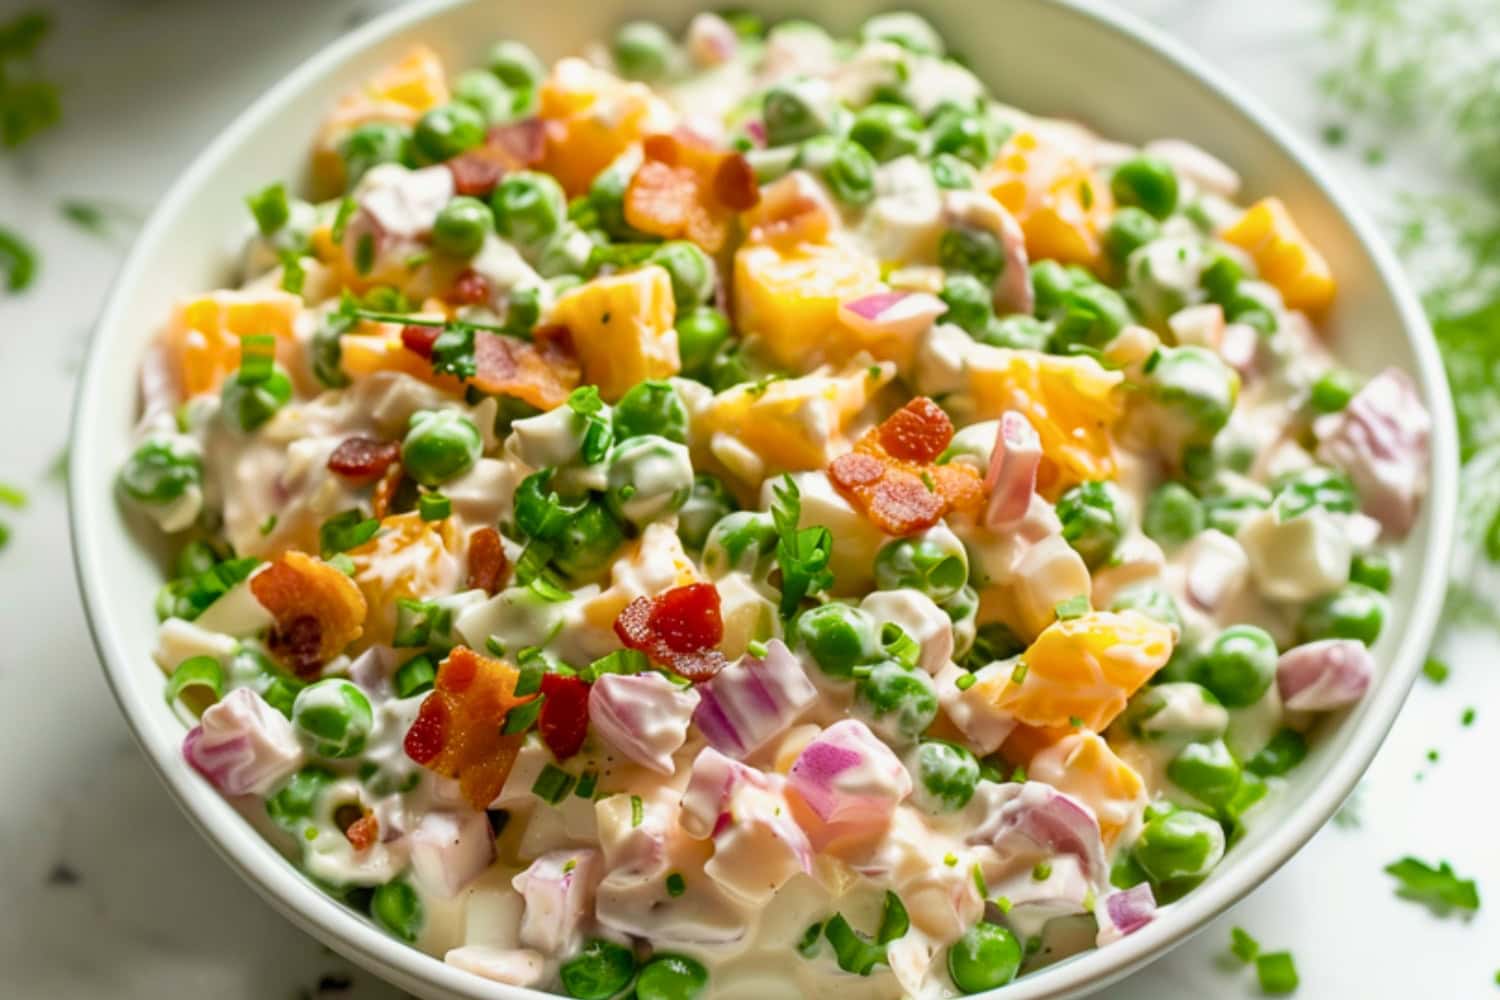 Pea salad in a white bowl loaded with cheese, bacon, green peas, and red onion in creamy mayonnaise dressing.